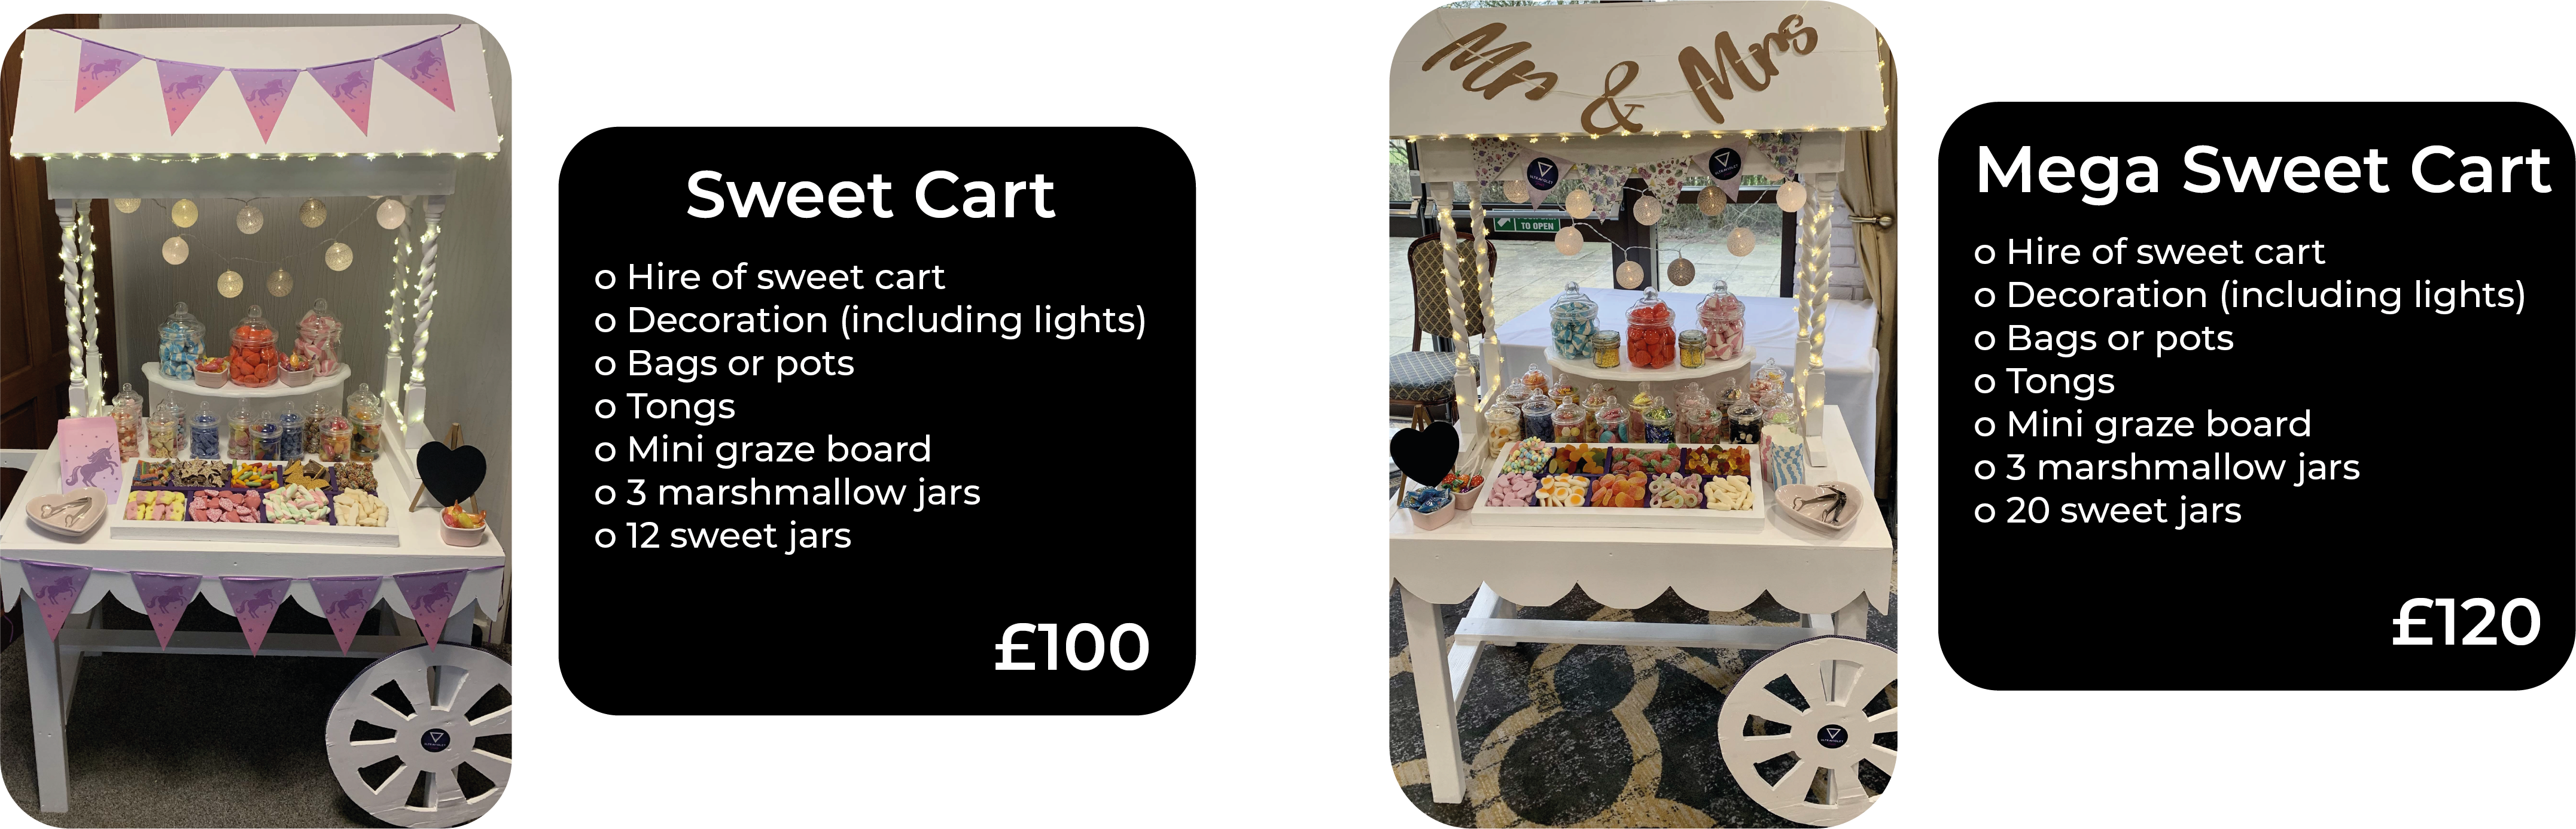 Sweet carts with jars and graze boards for weddings, parties or corporate events